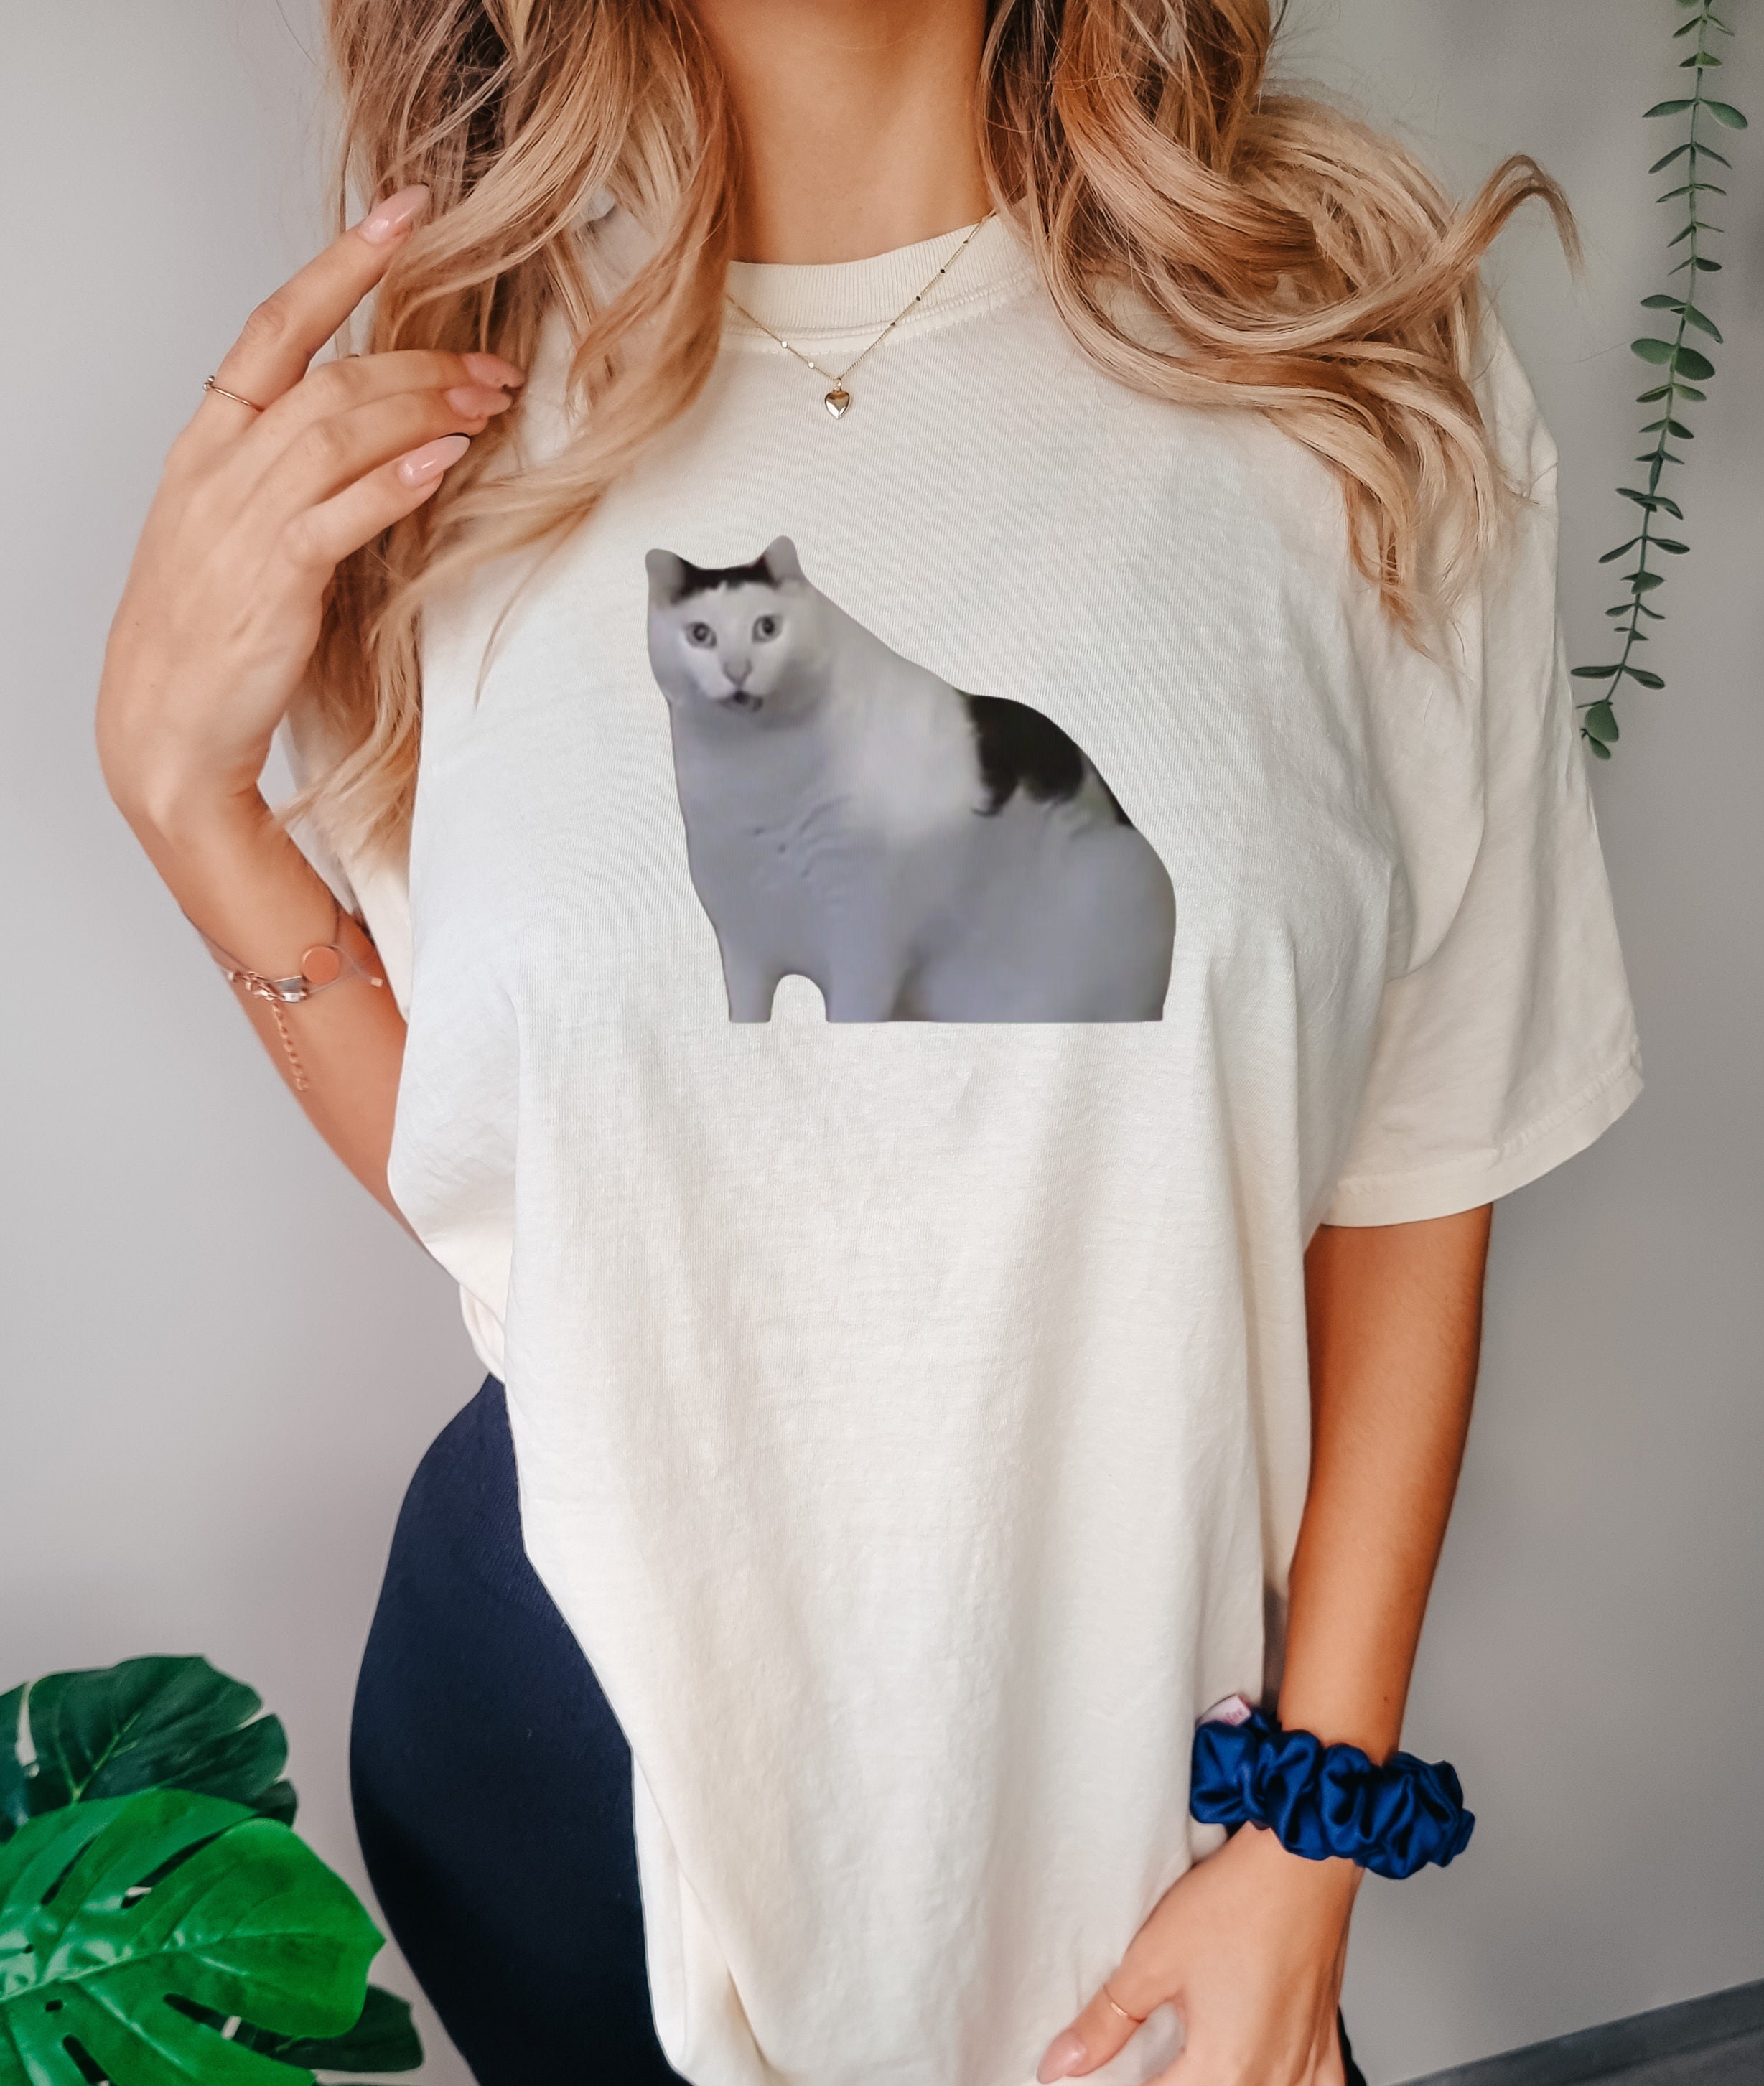 HUH Cat Essential T-Shirt for Sale by olbibulbis